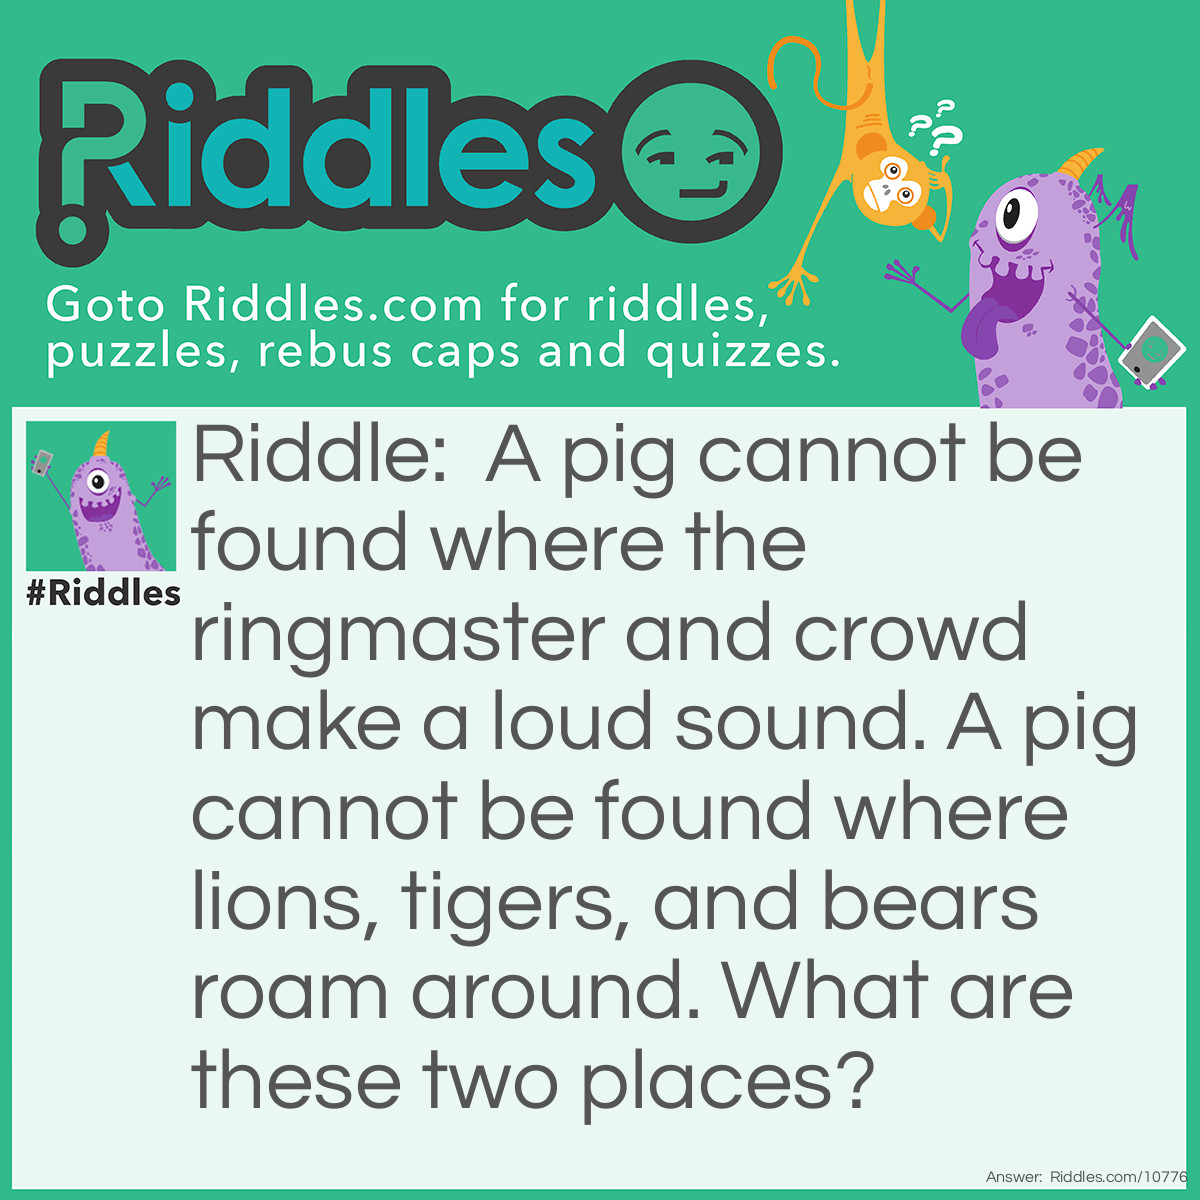 Riddle: A pig cannot be found where the ringmaster and crowd make a loud sound. A pig cannot be found where lions, tigers, and bears roam around. What are these two places? Answer: The circus and the zoo.